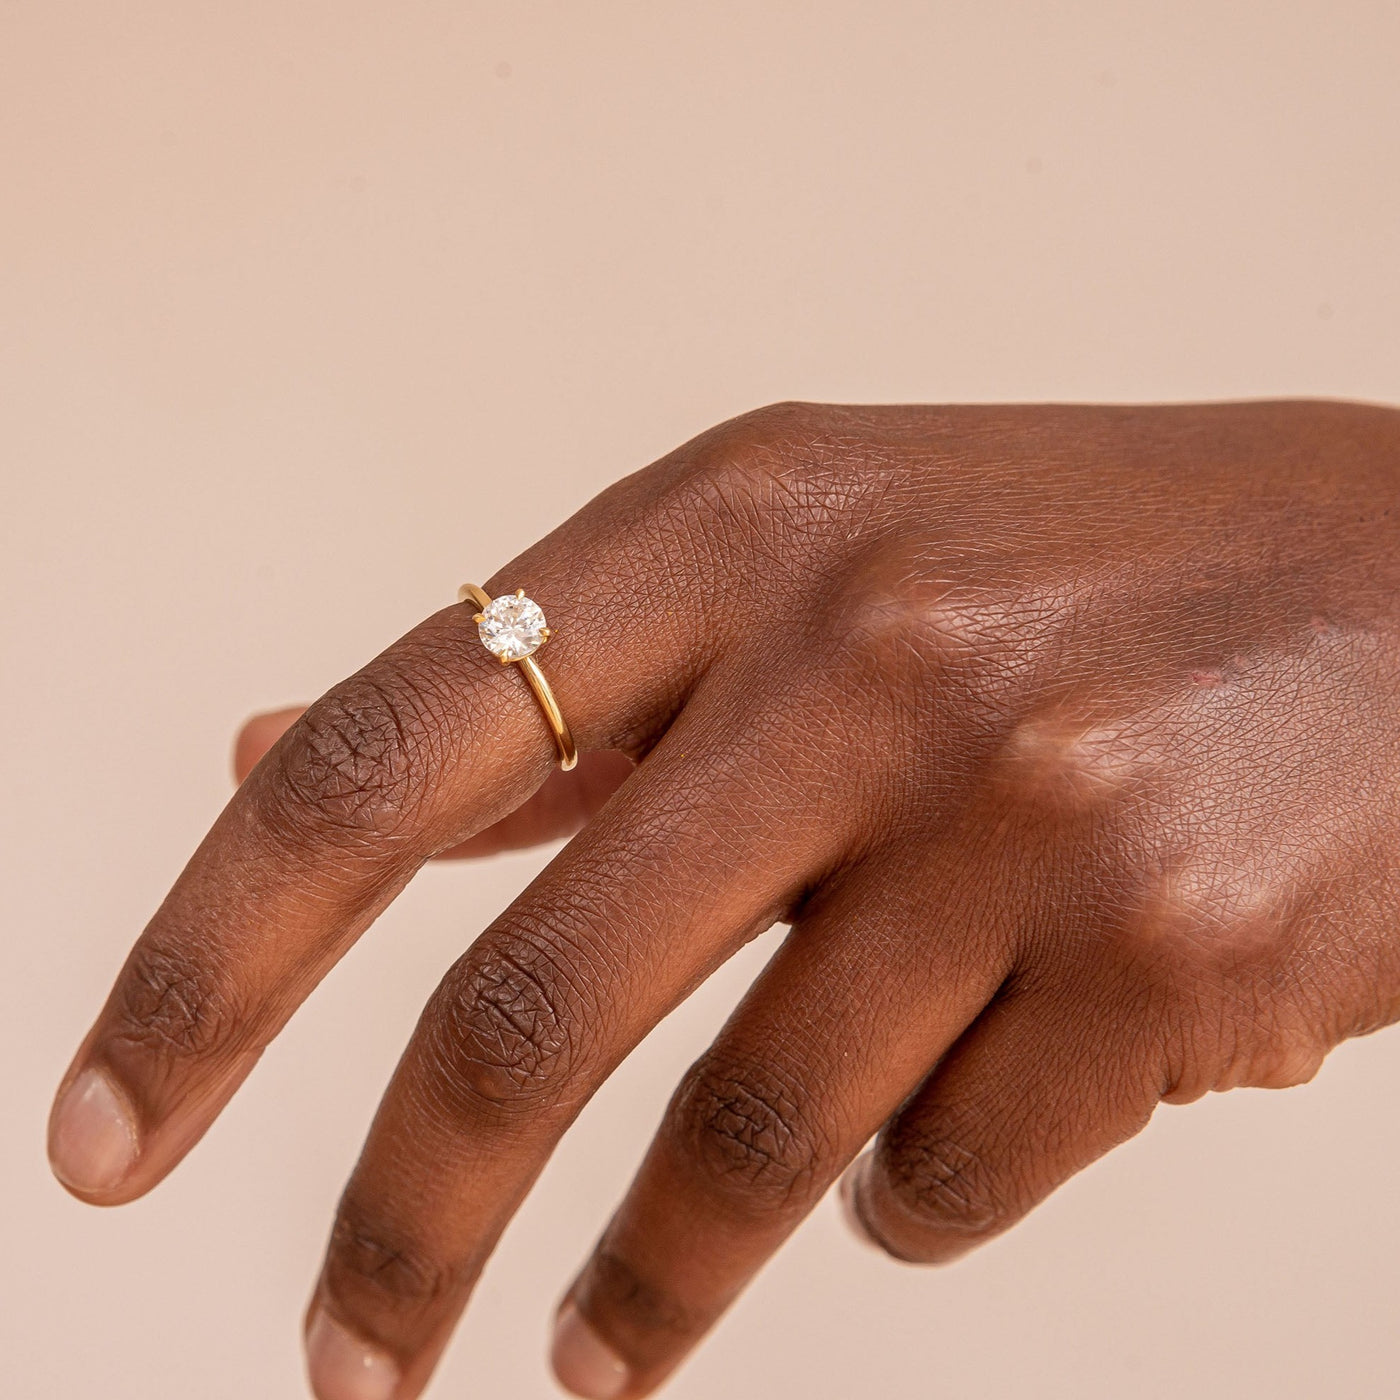 Solitaire ring by Juna Fae made of lab grown diamonds and 18k recycled gold